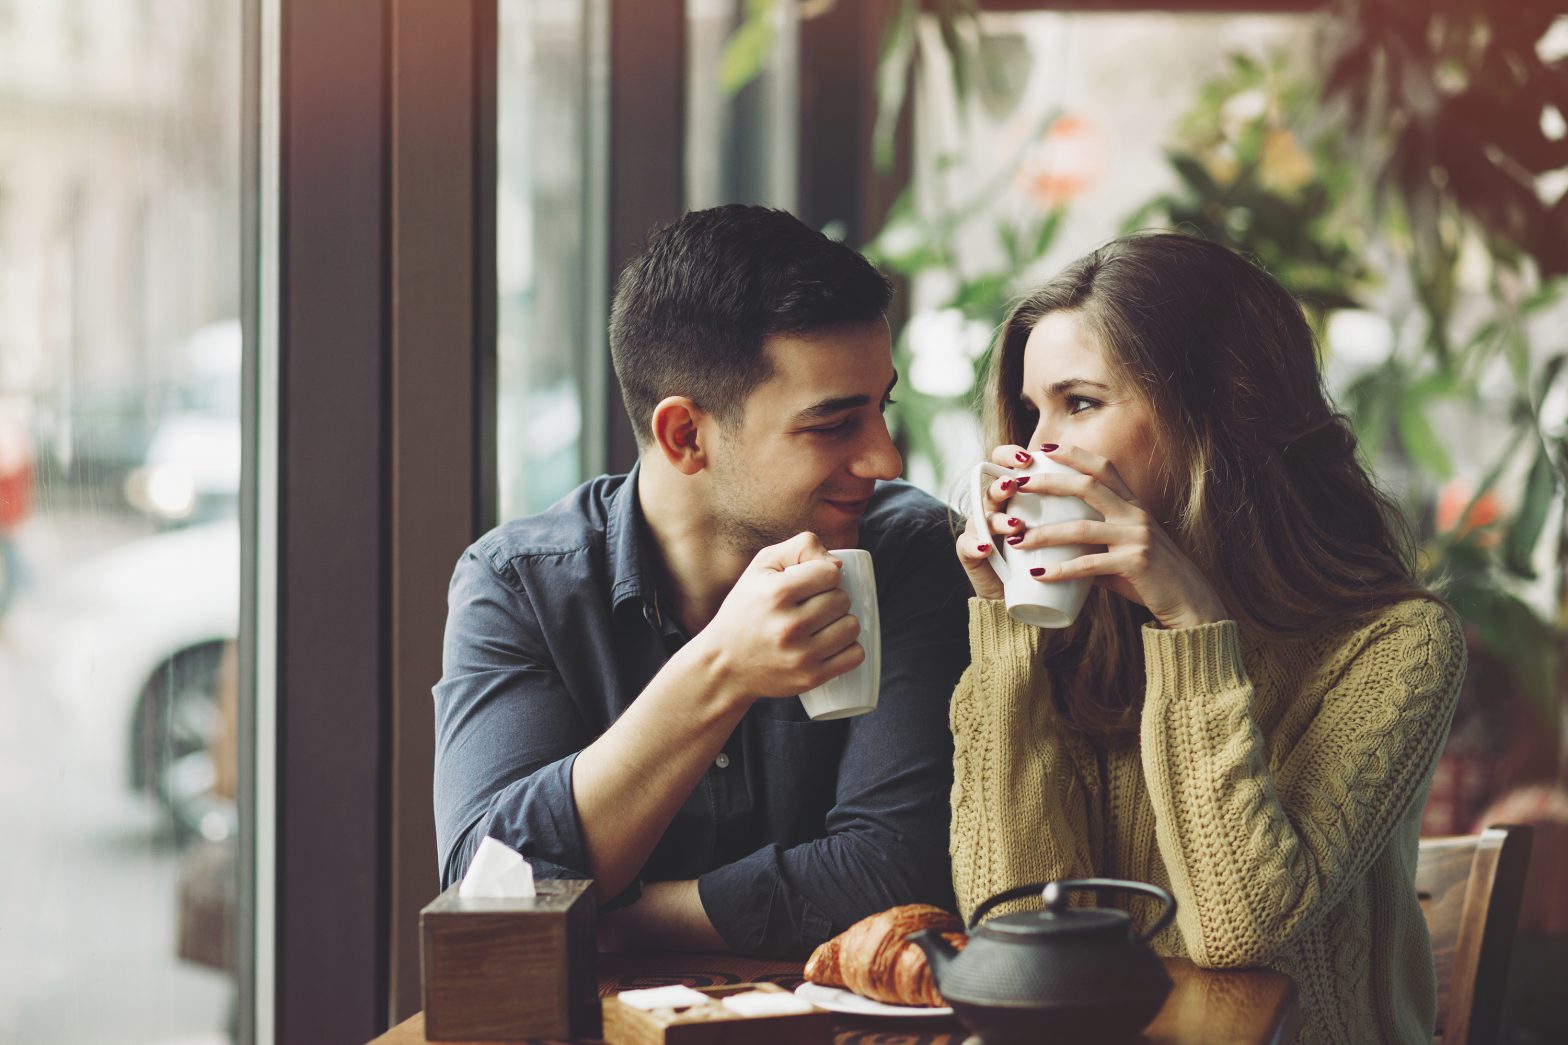 Effective Content Strategy: 5 Rules for a First Date